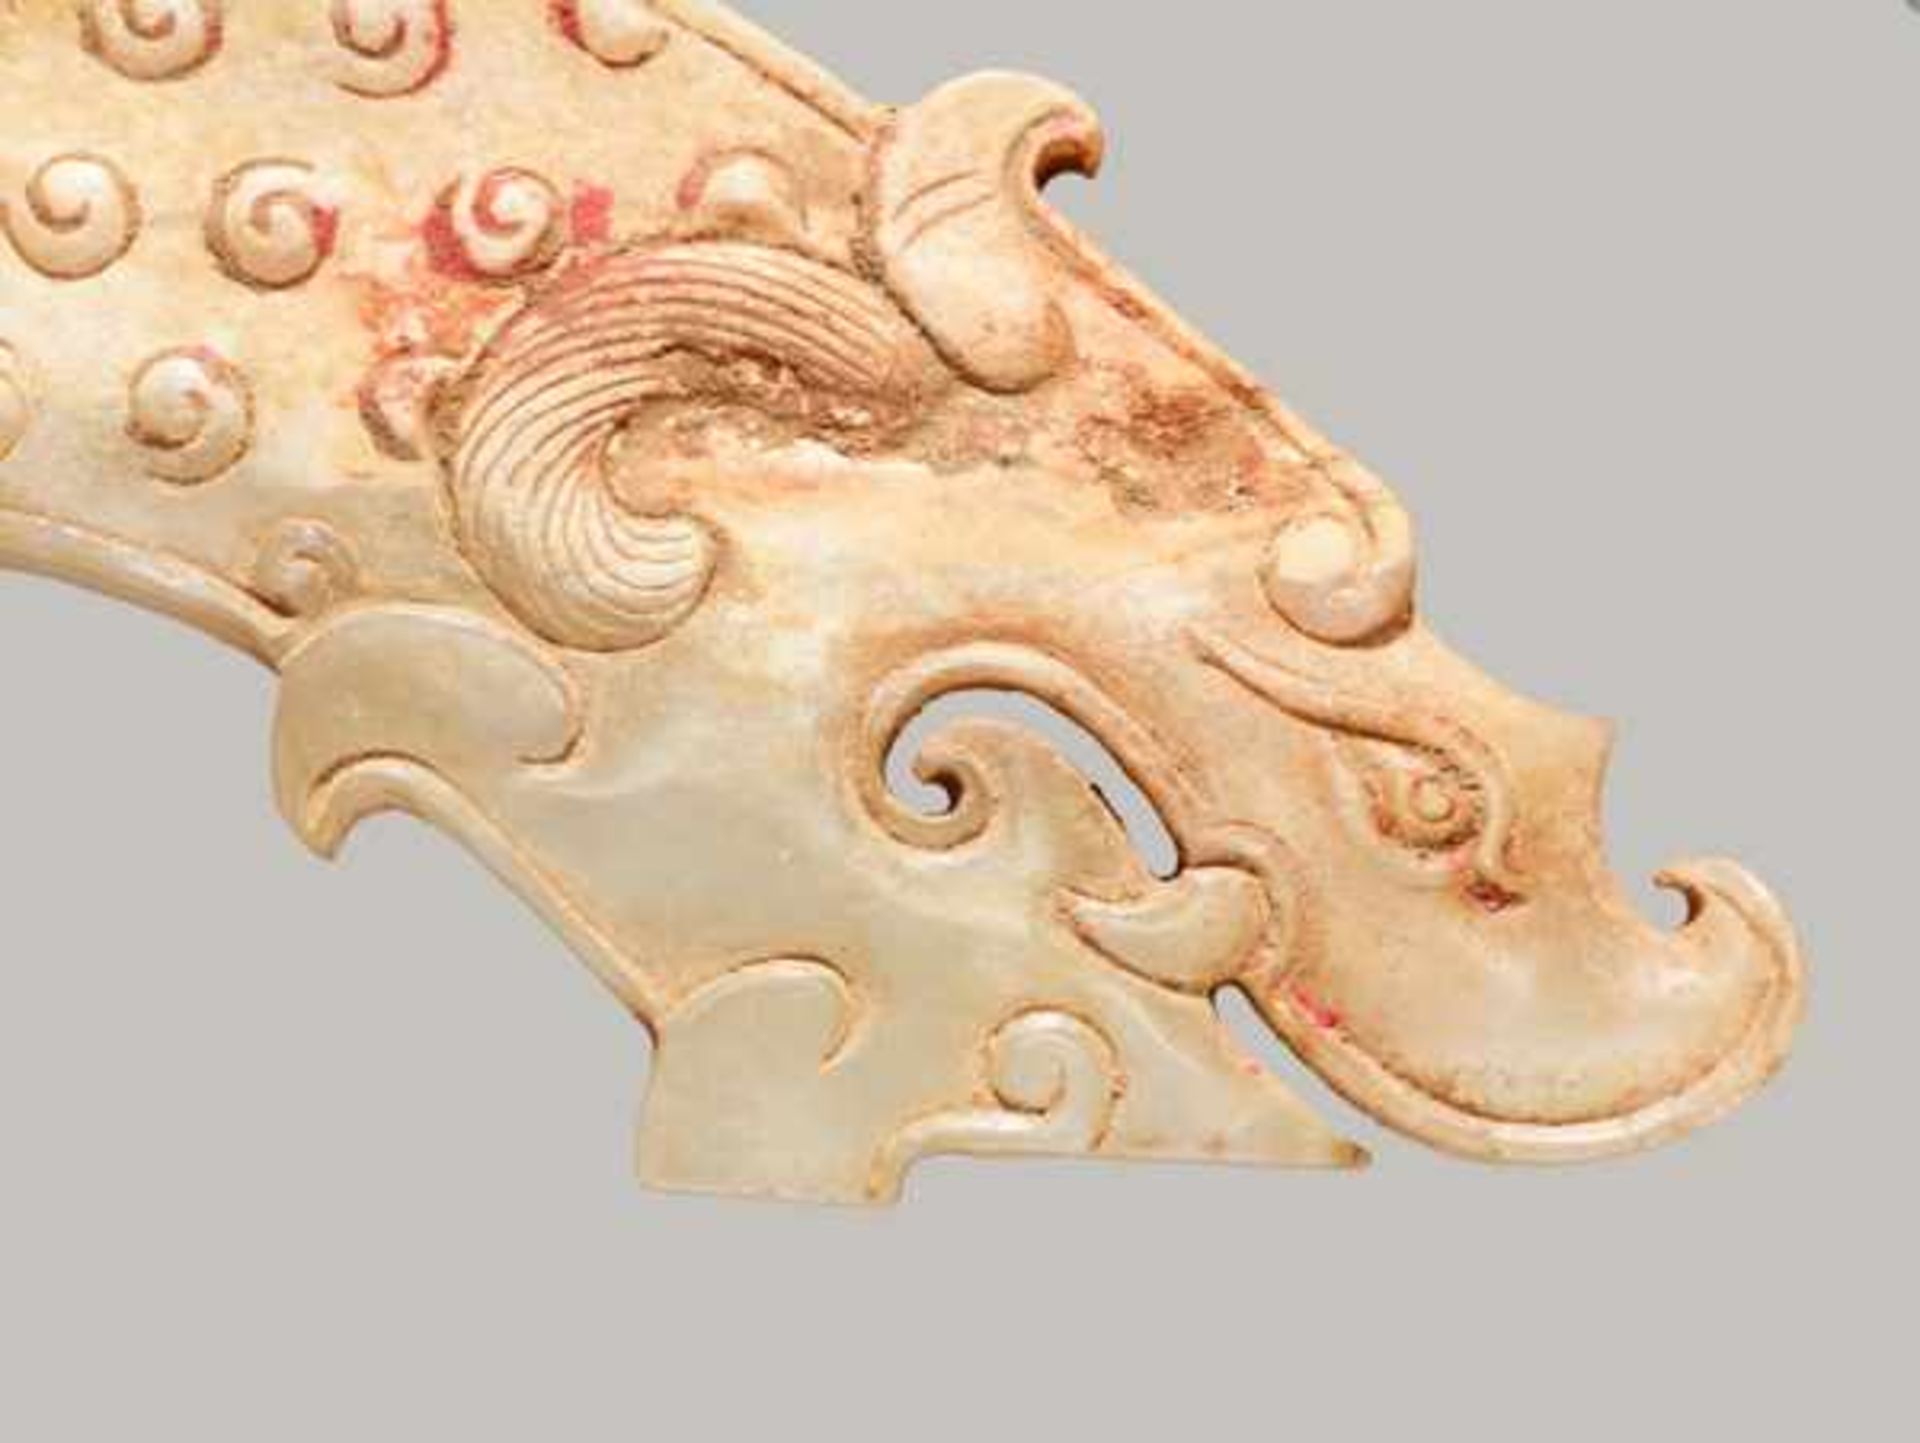 A POWERFUL HUANG ARCHED PENDANT WITH FINELY DETAILED DRAGON HEADS AND A PATTERN OF RAISED CURLS - Image 3 of 8